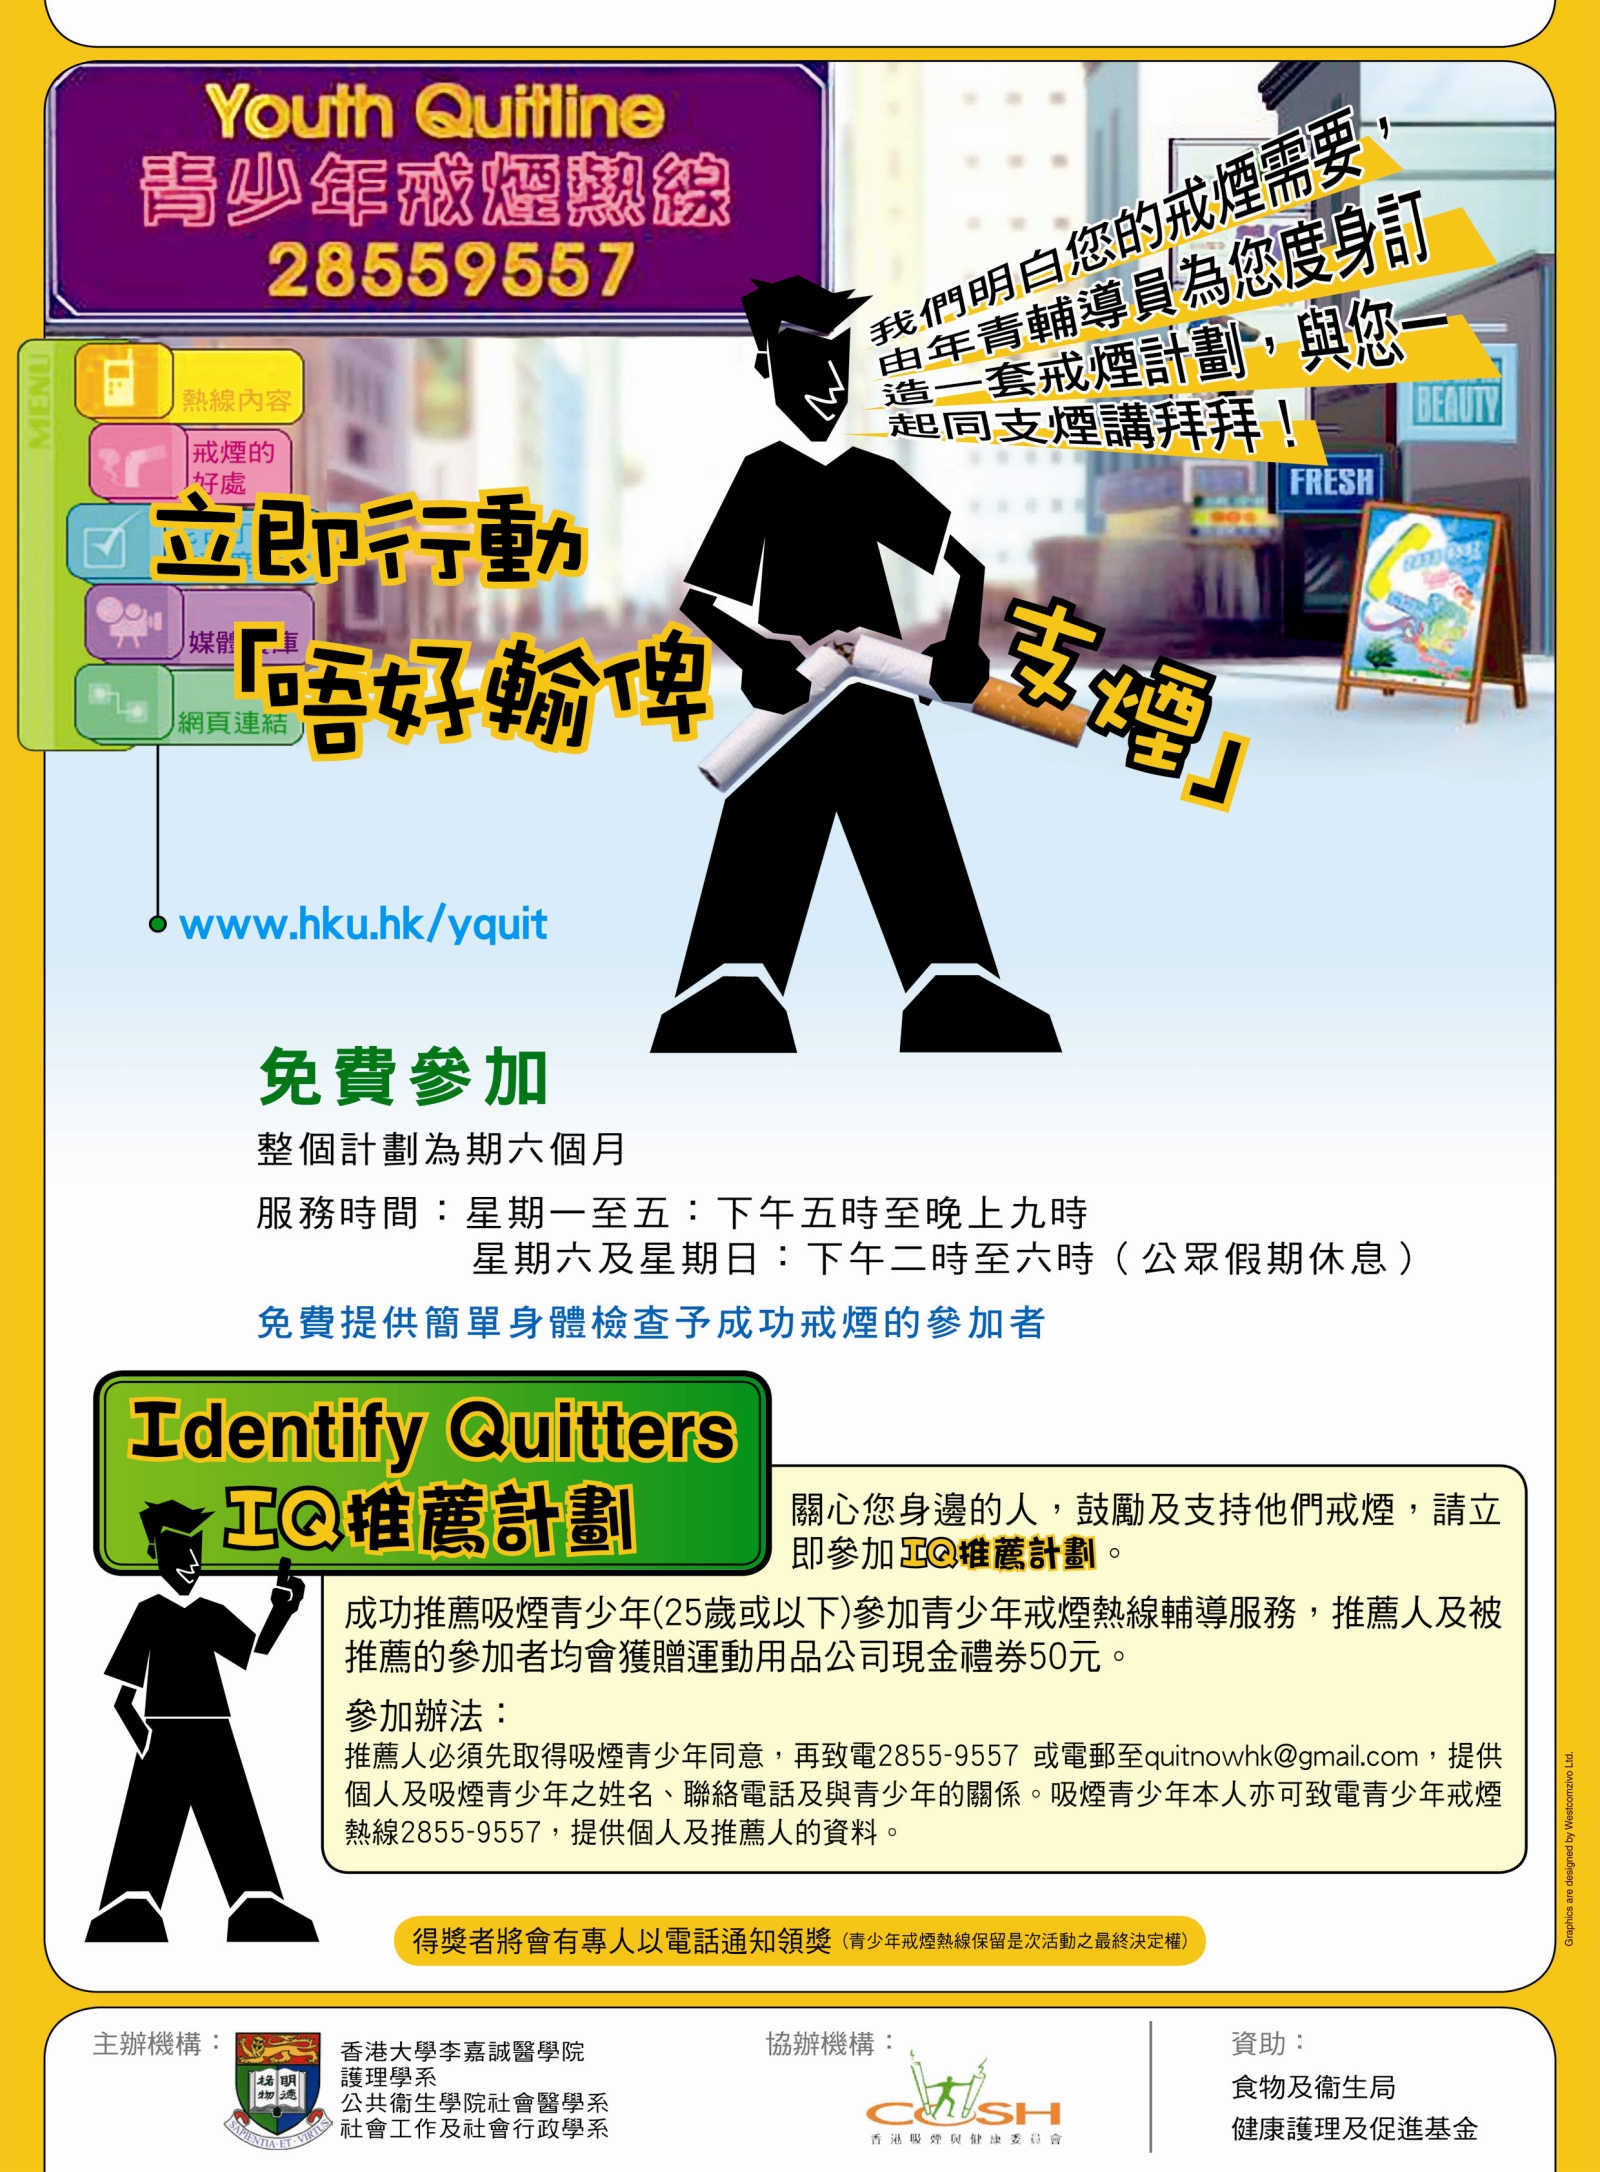 HKU School of Nursing is now providing a telephone smoking cessation service for youth smoker, targeted at Chinese smokers aged 12-25, who smoke at least 1 cigarette in the past 30 days and willing to have followe up.